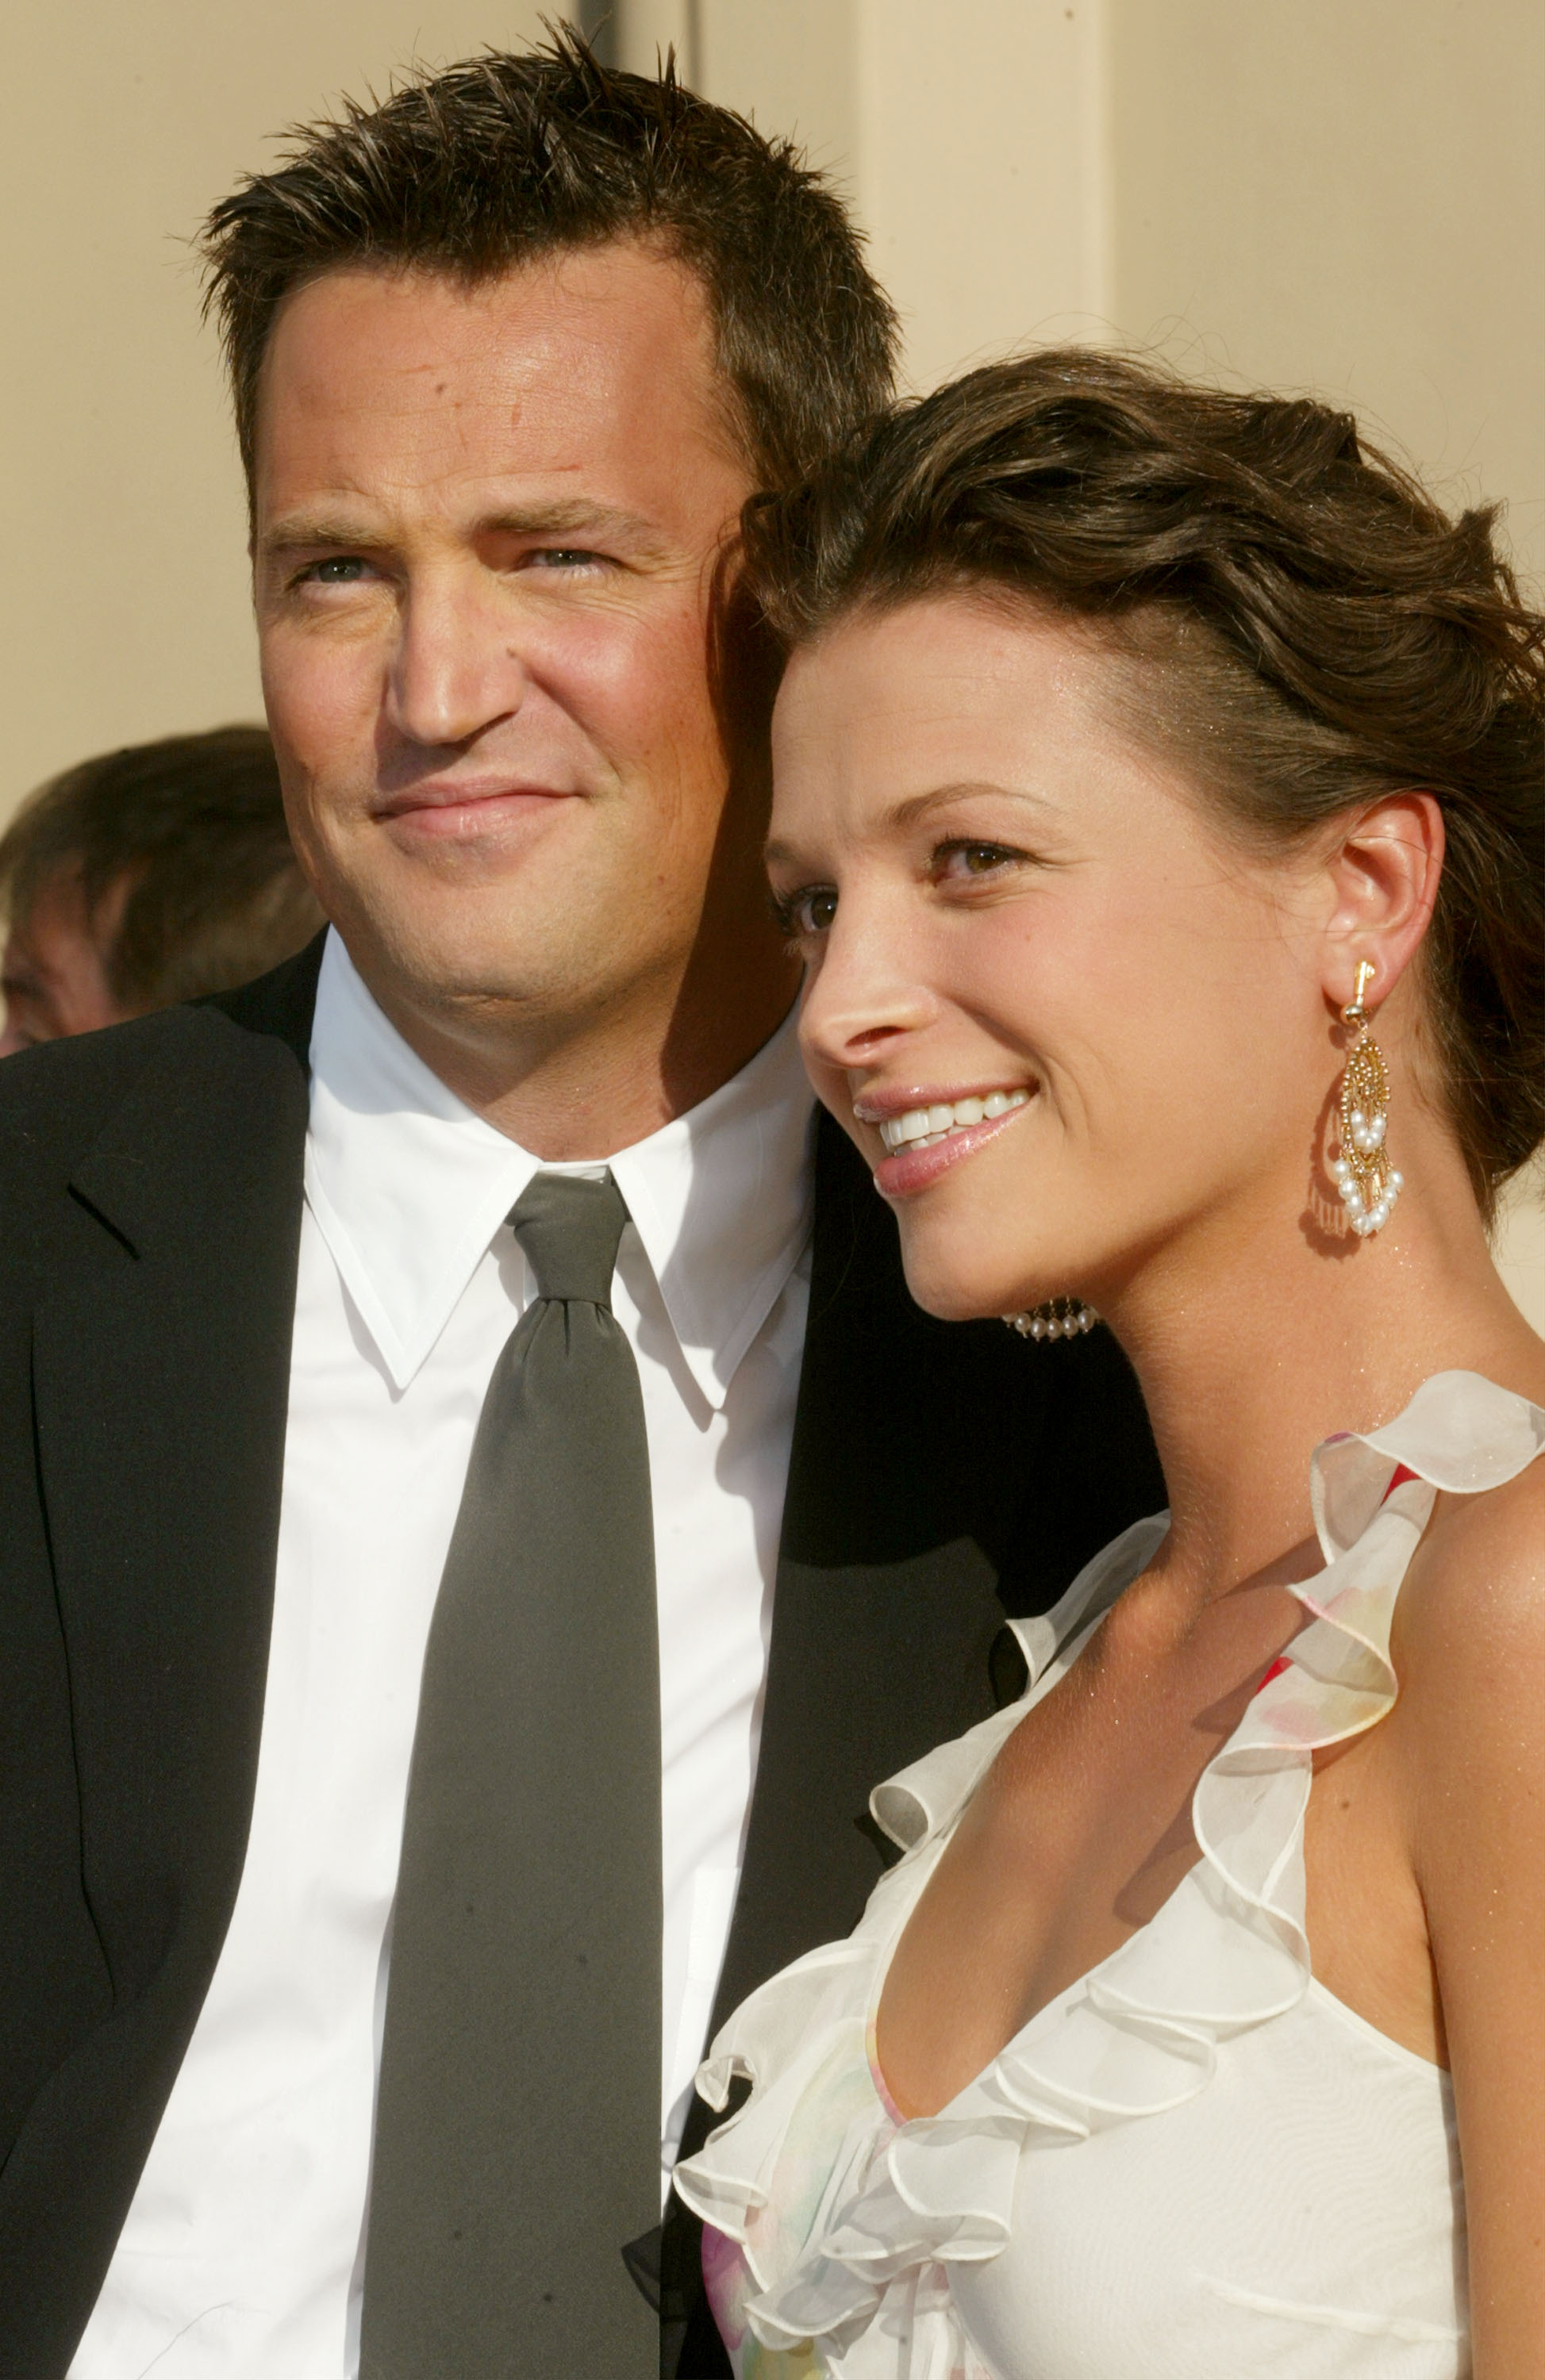 Matthew Perry and Rachel Dunn at the 2003 Primetime Creative Arts Awards on September 13, 2003, in Los Angeles, California. | Source: Getty Images